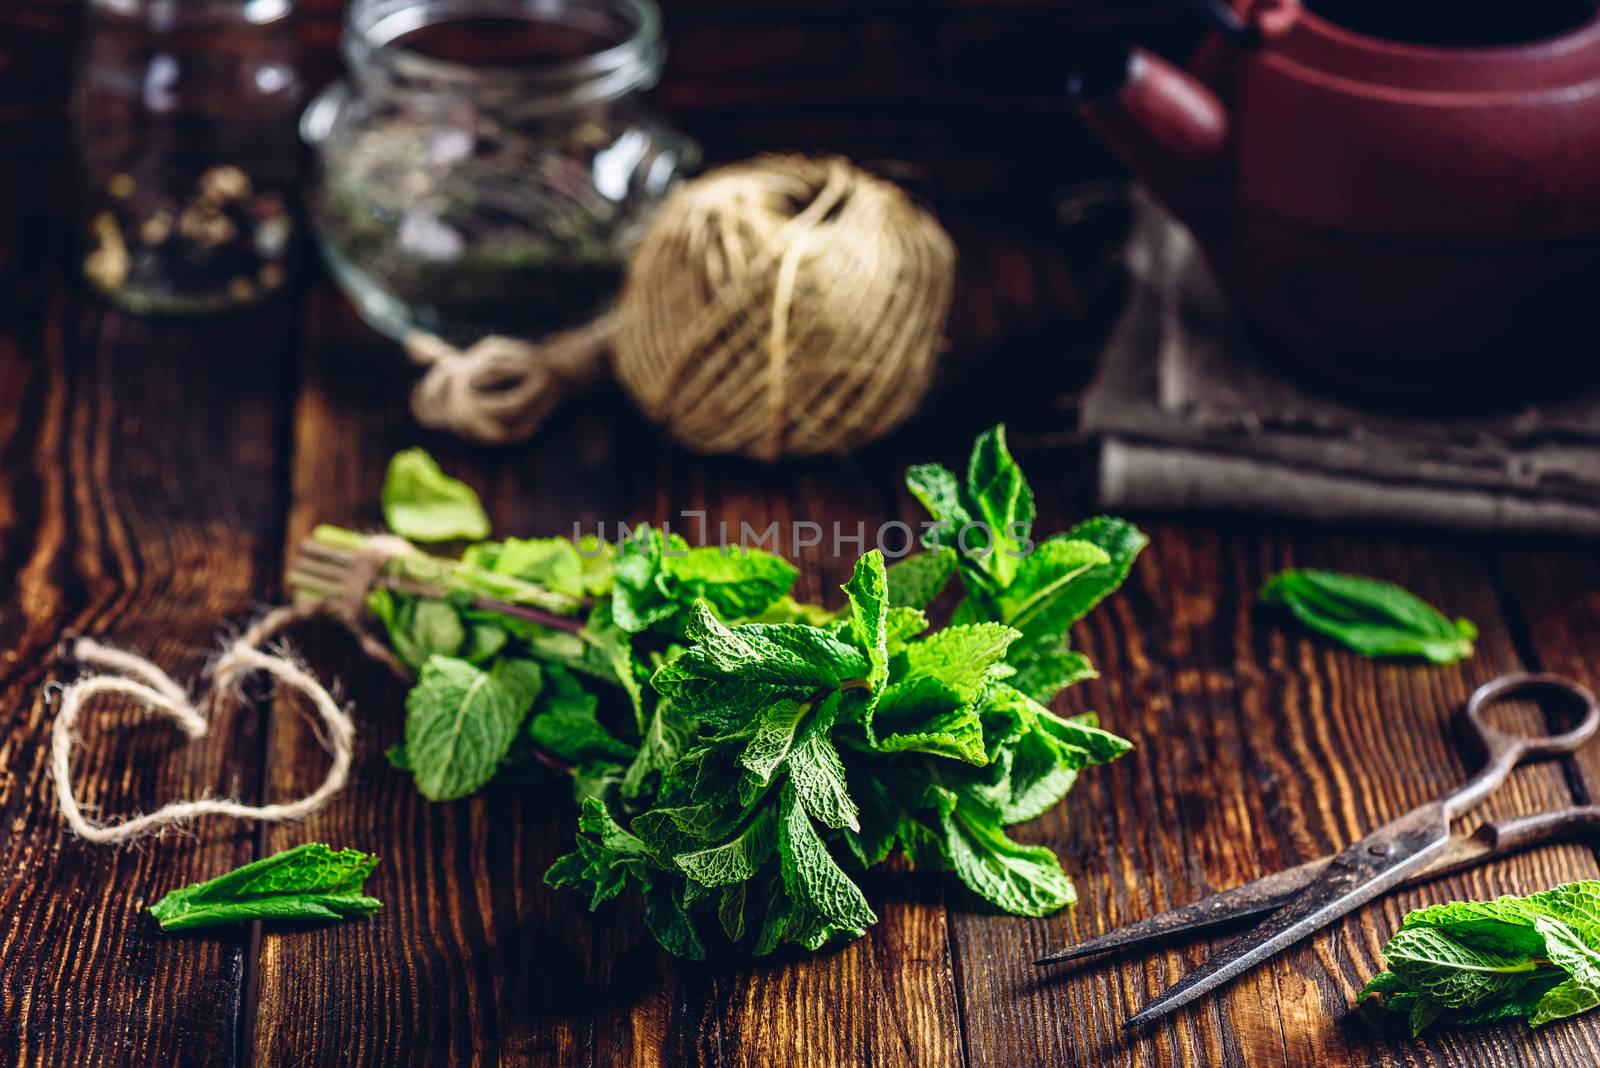 Bunch of Fresh Mint with Rusty Scissors. Tangle with Two Jars and Teapot on Backdrop.